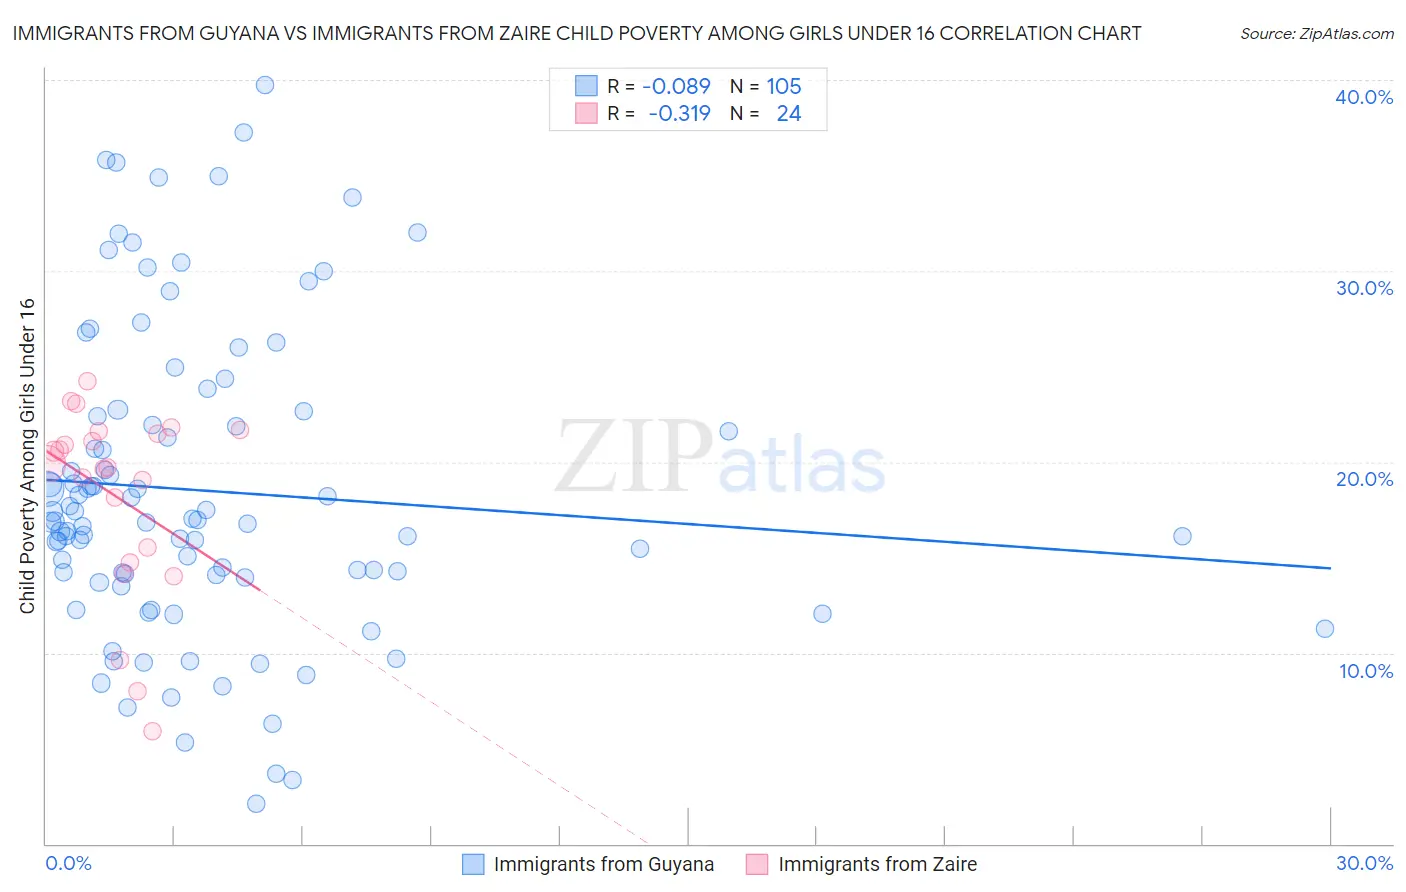 Immigrants from Guyana vs Immigrants from Zaire Child Poverty Among Girls Under 16